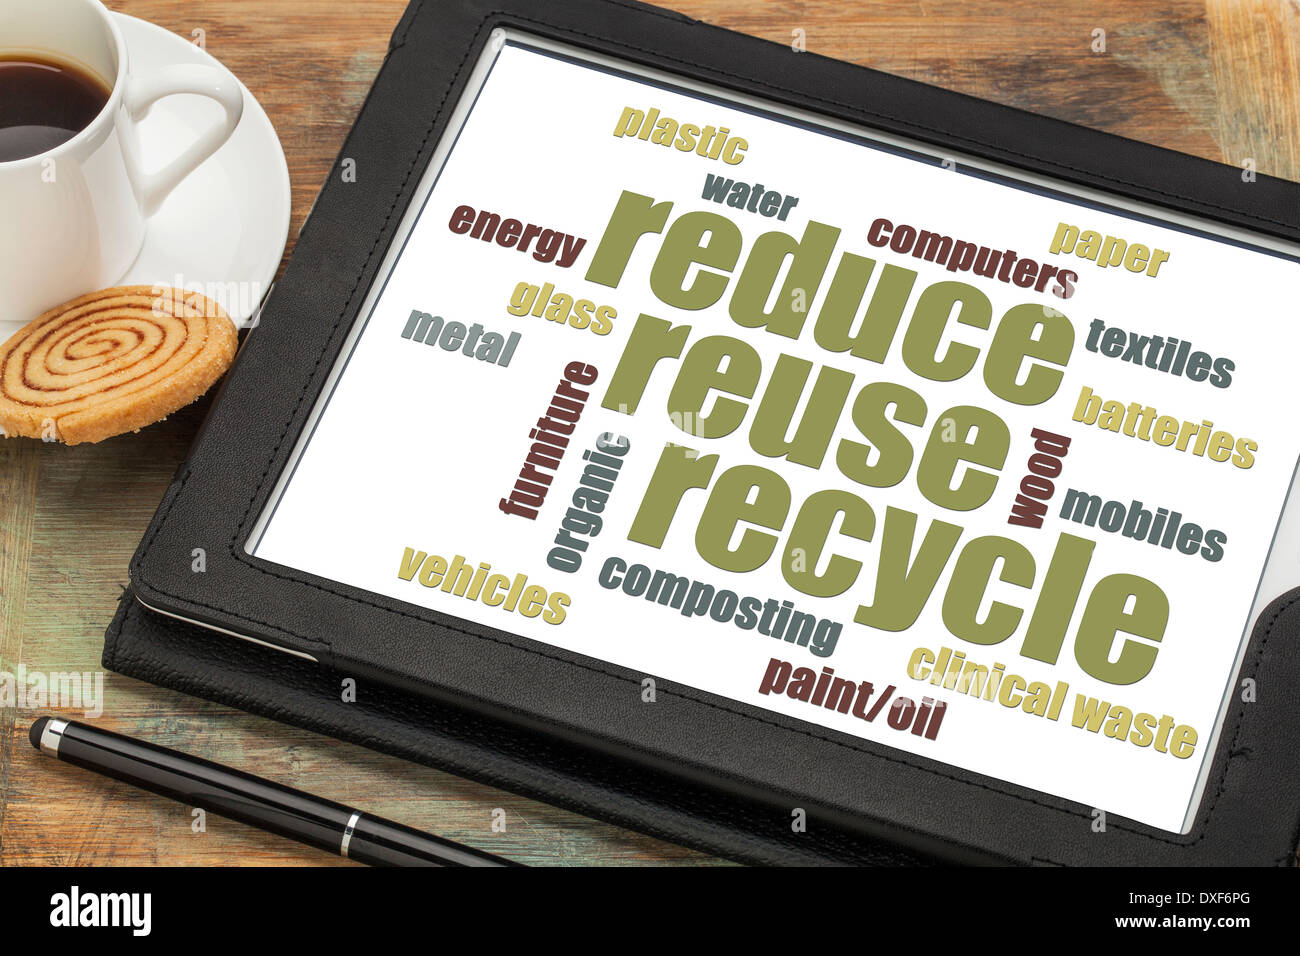 reduce, reuse, recycle word cloud on a digital tablet with a cup of coffee Stock Photo